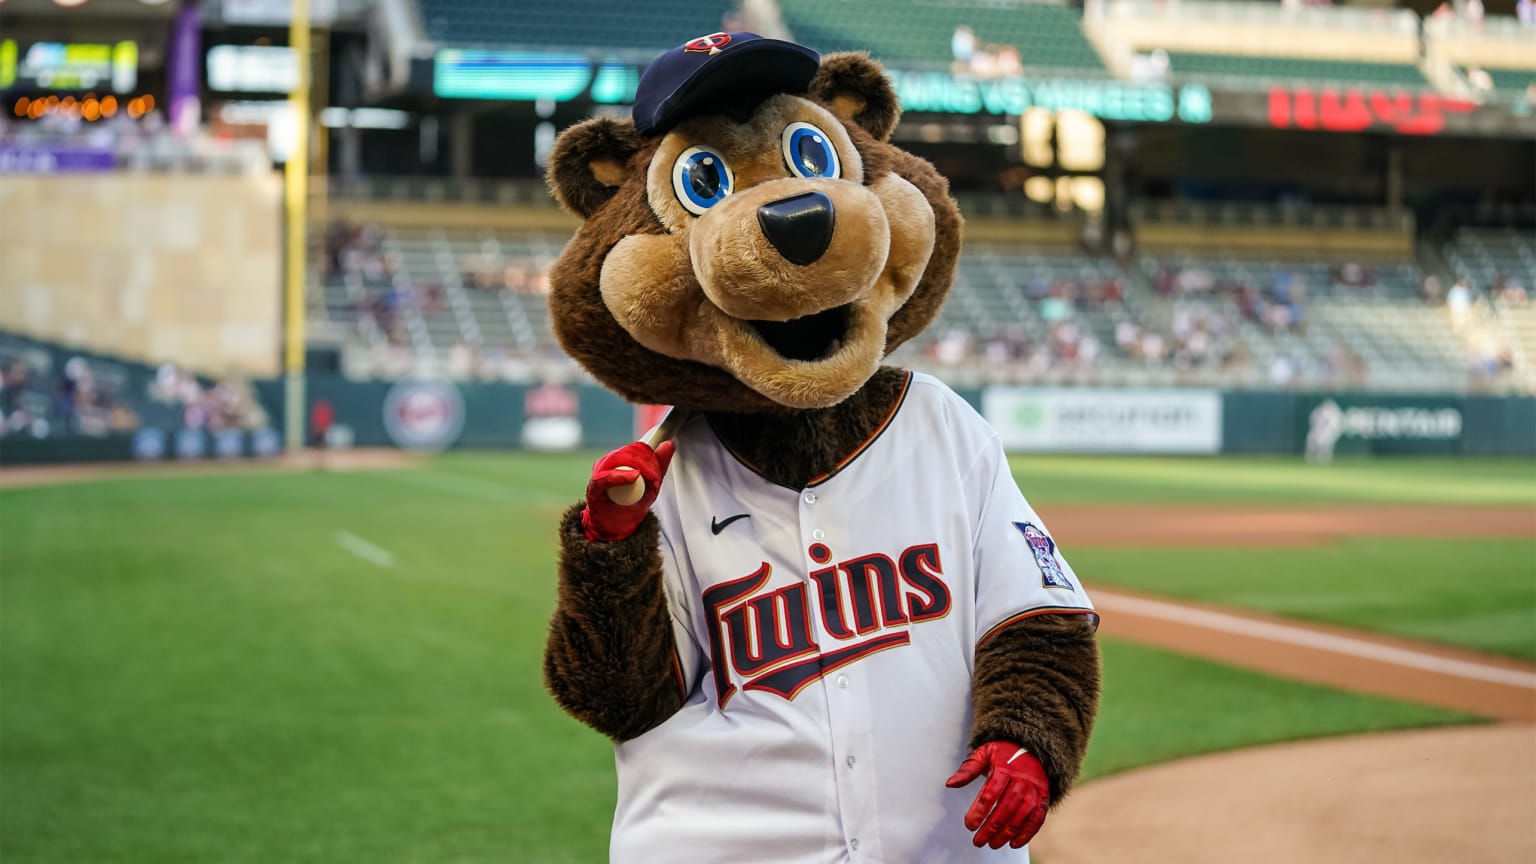 The Majestic Clubhouse Shopping Spree gives season ticket holders one  minute to run around the store and gather up to $1,000 worth of merchandise!, By Minnesota Twins Season Ticket Holders